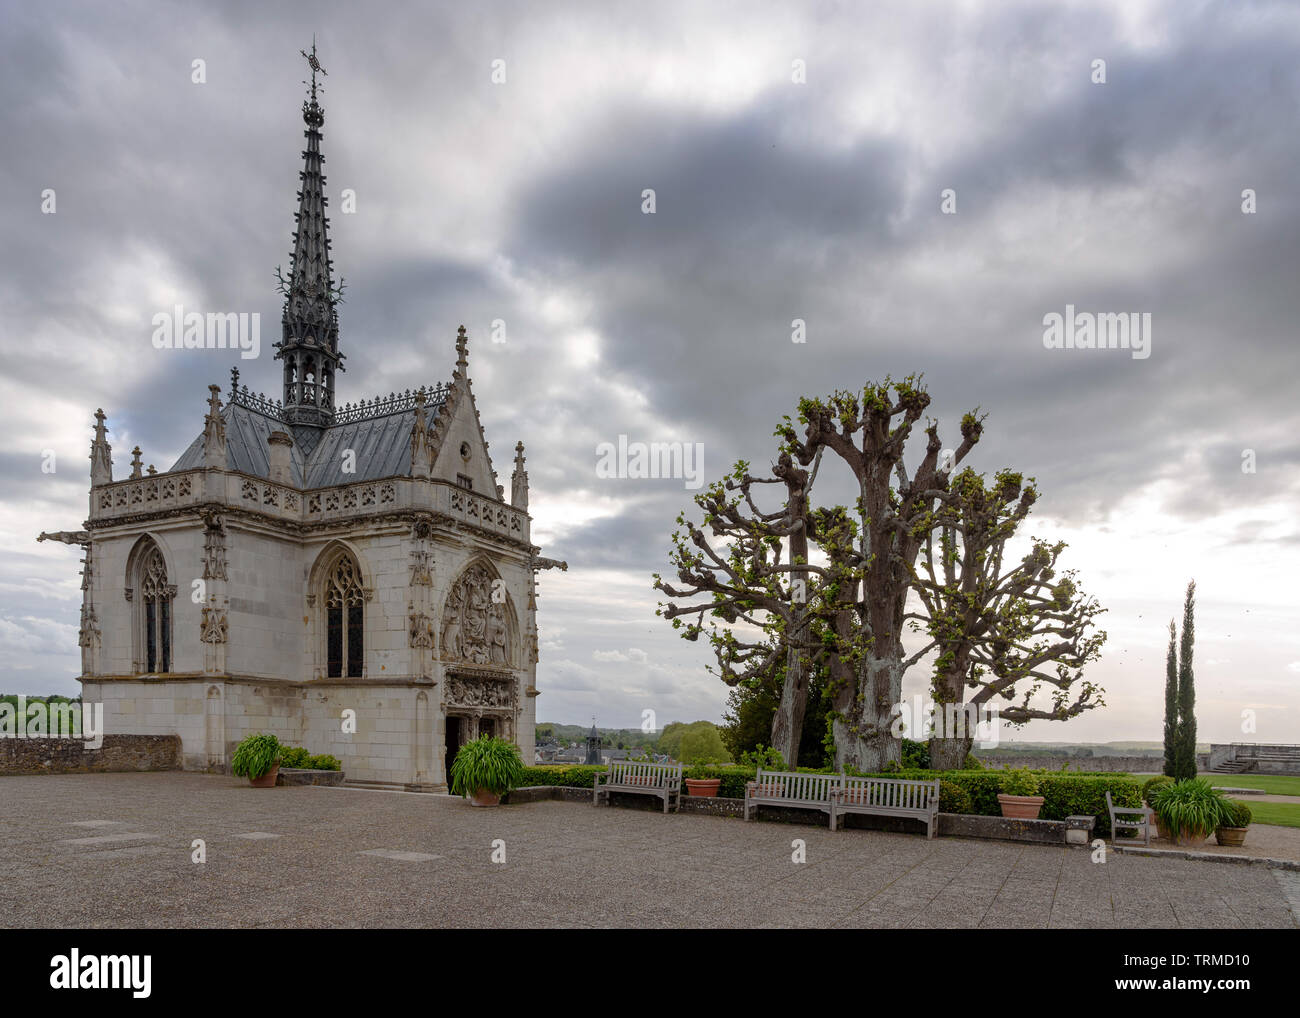 The Chapel of Saint Hubert, which contains Leonardo da Vinci's grave, on a cloudy spring day Stock Photo